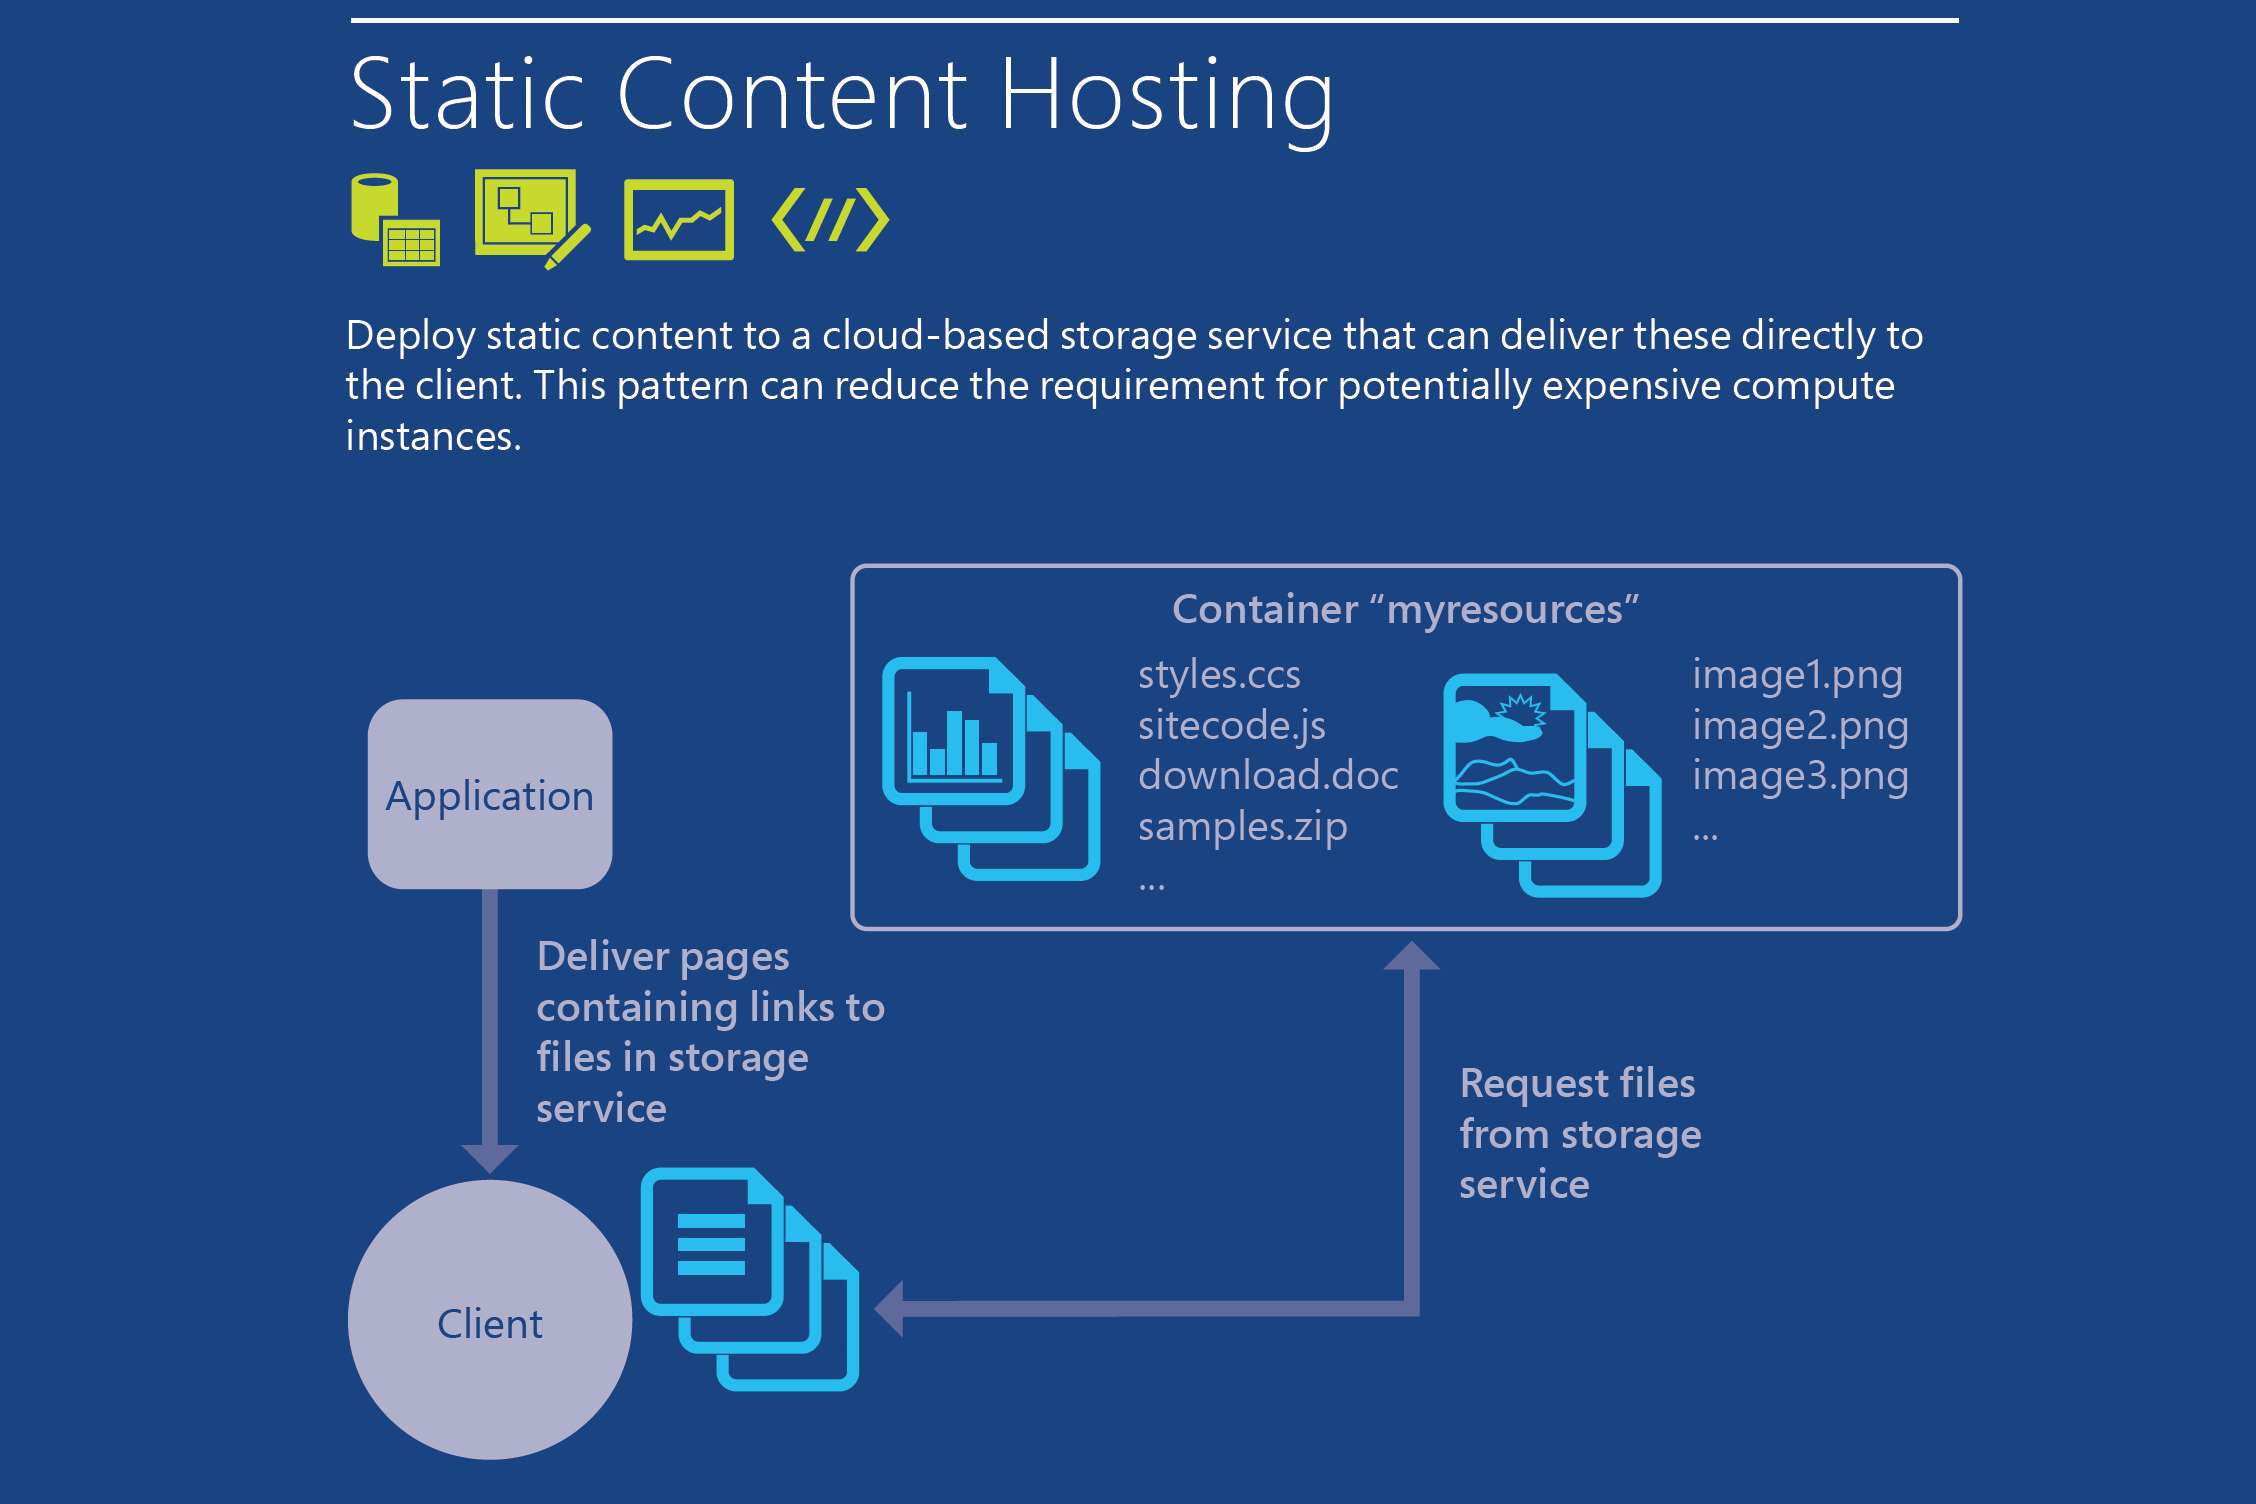 Static Content Hosting Pattern